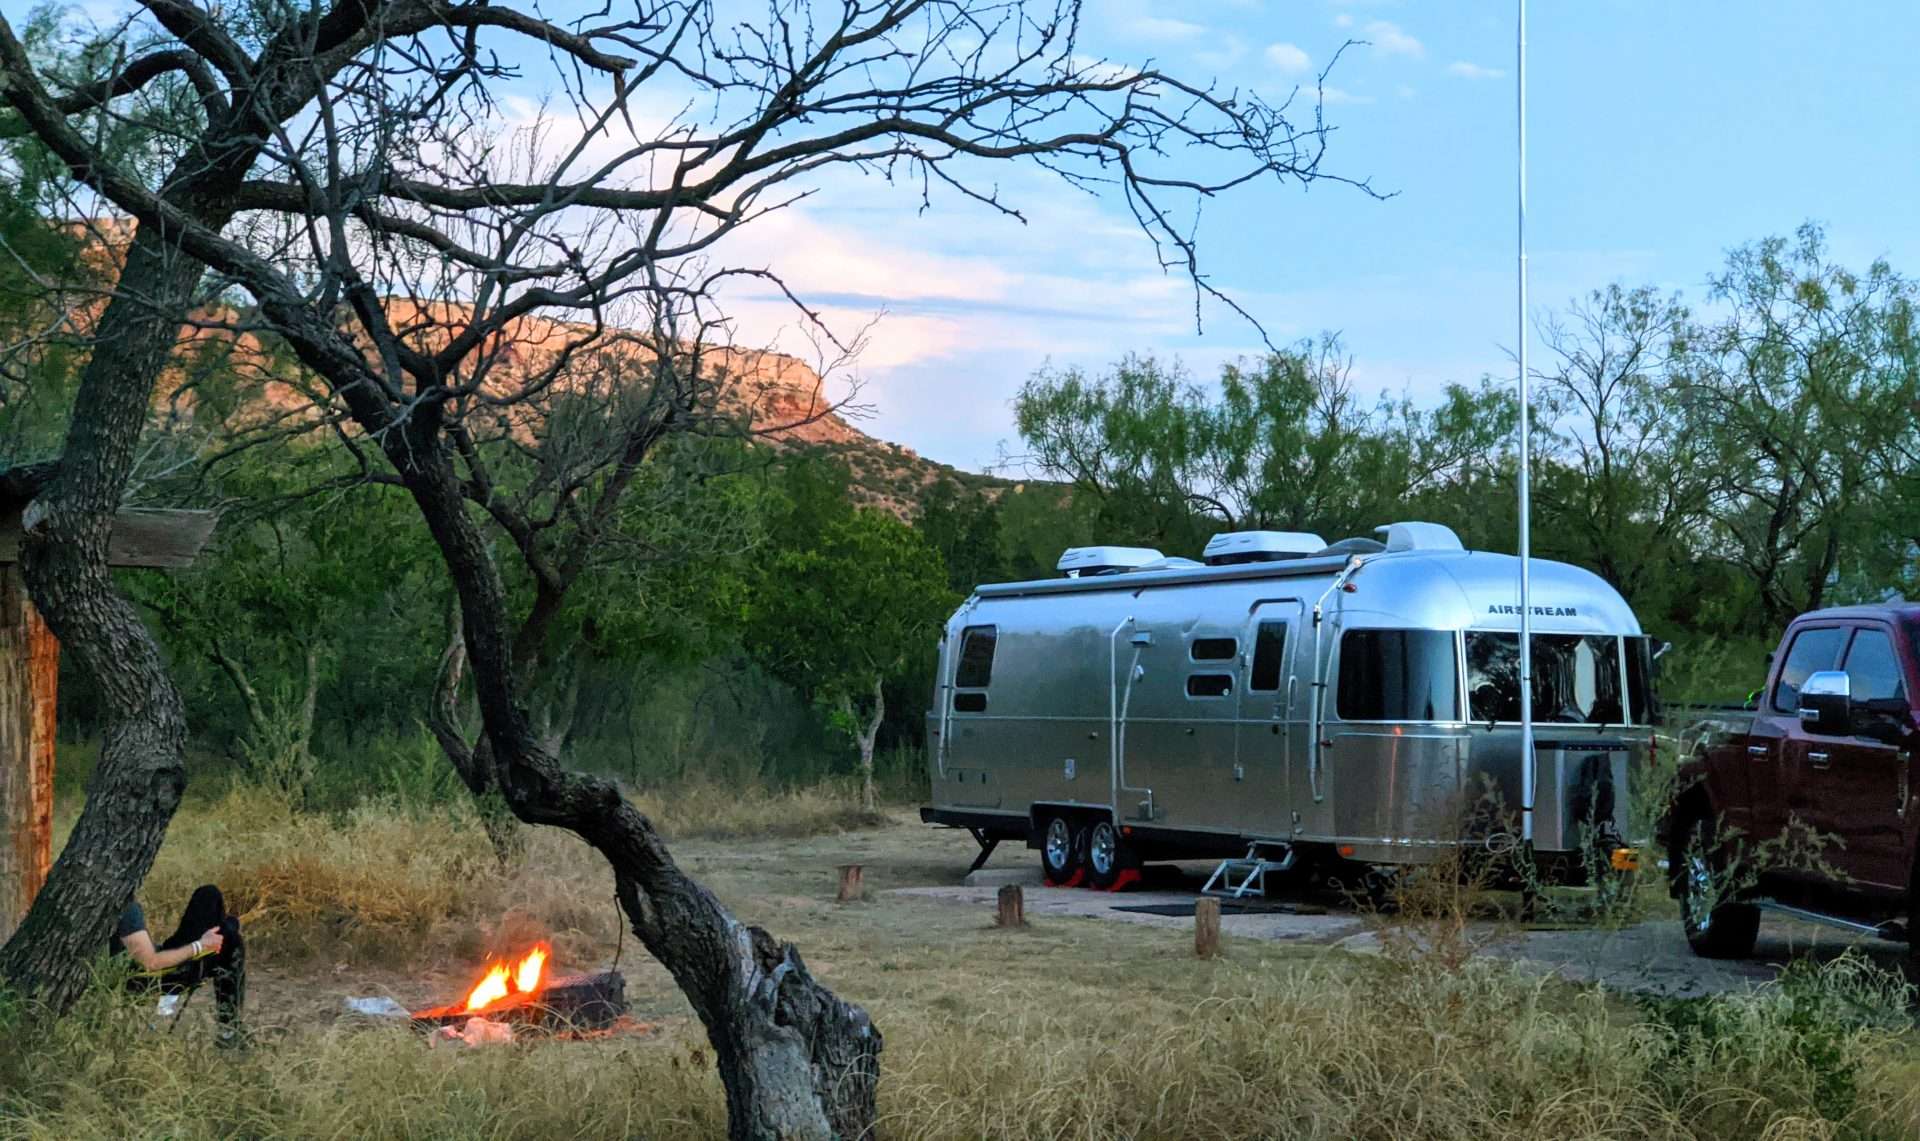 Airstream parked next to campfire.